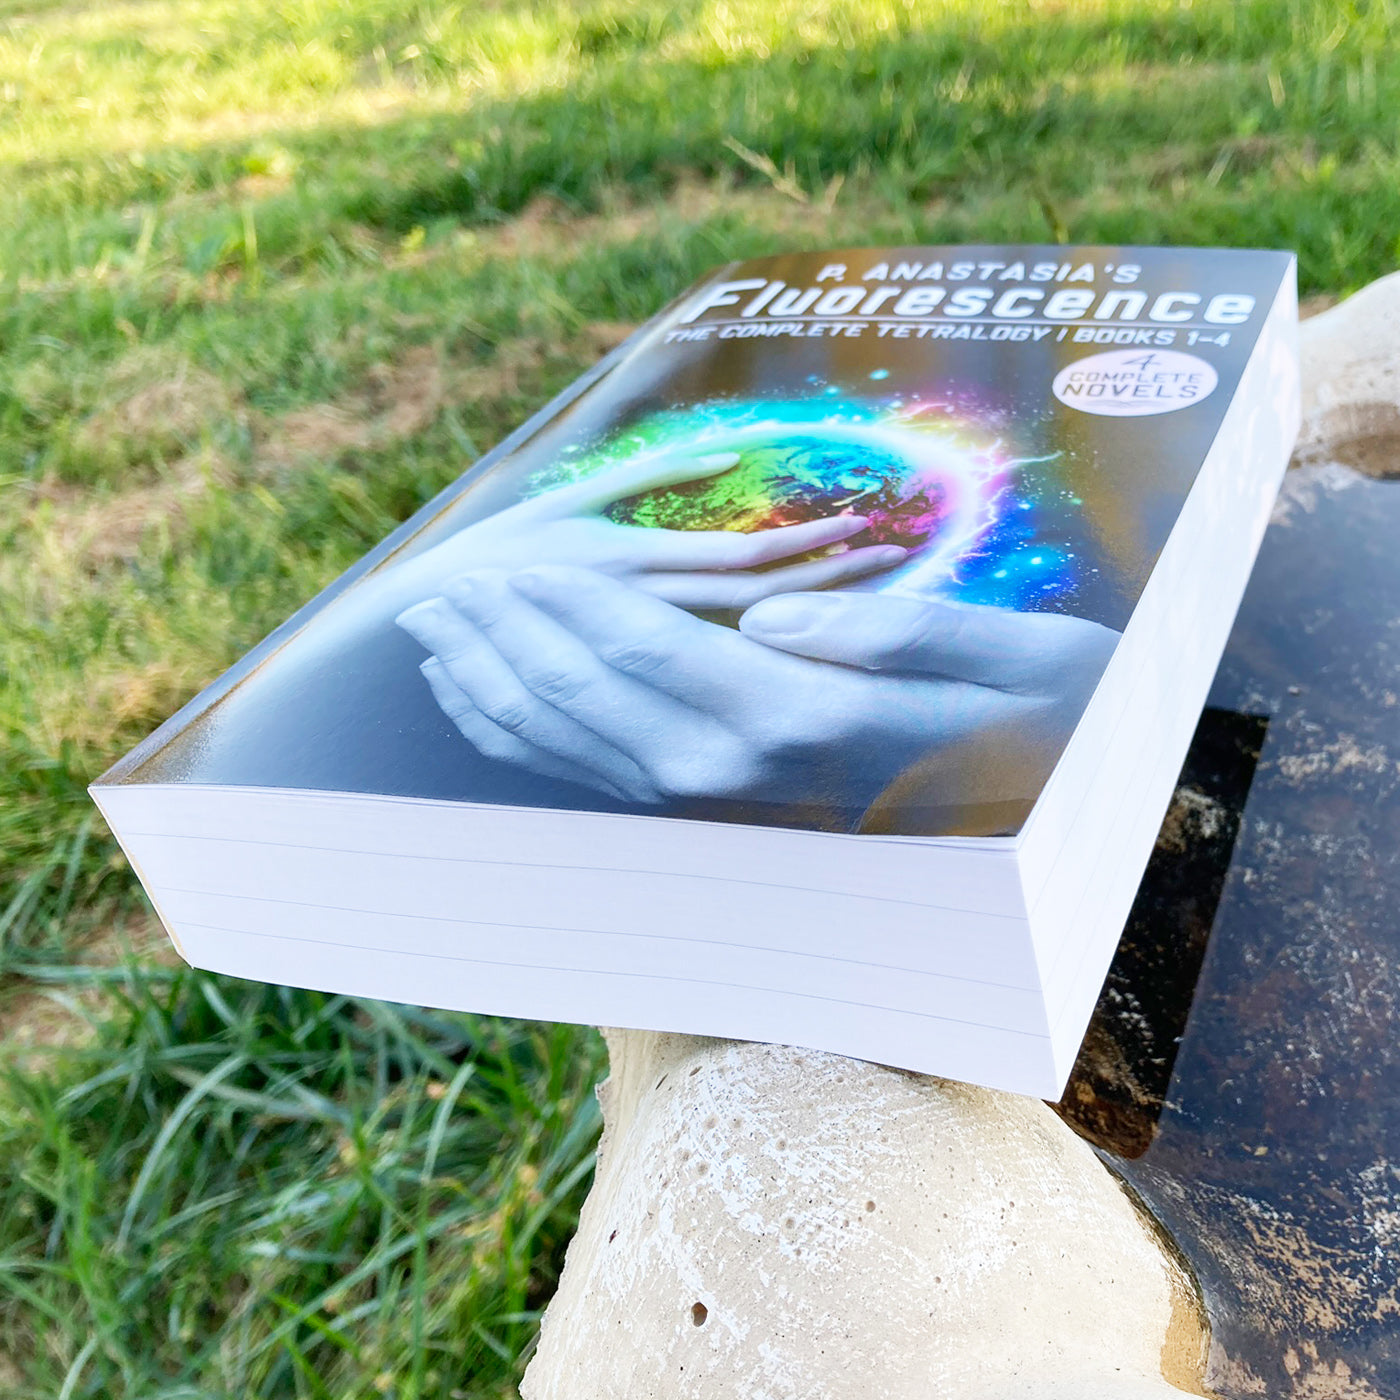 *IMPERFECT COPY* SEE DESCRIPTION! SIGNED Fluorescence: The Complete Tetralogy Omnibus 6" X 9" PAPERBACK [Contains BOOKS 1-4]